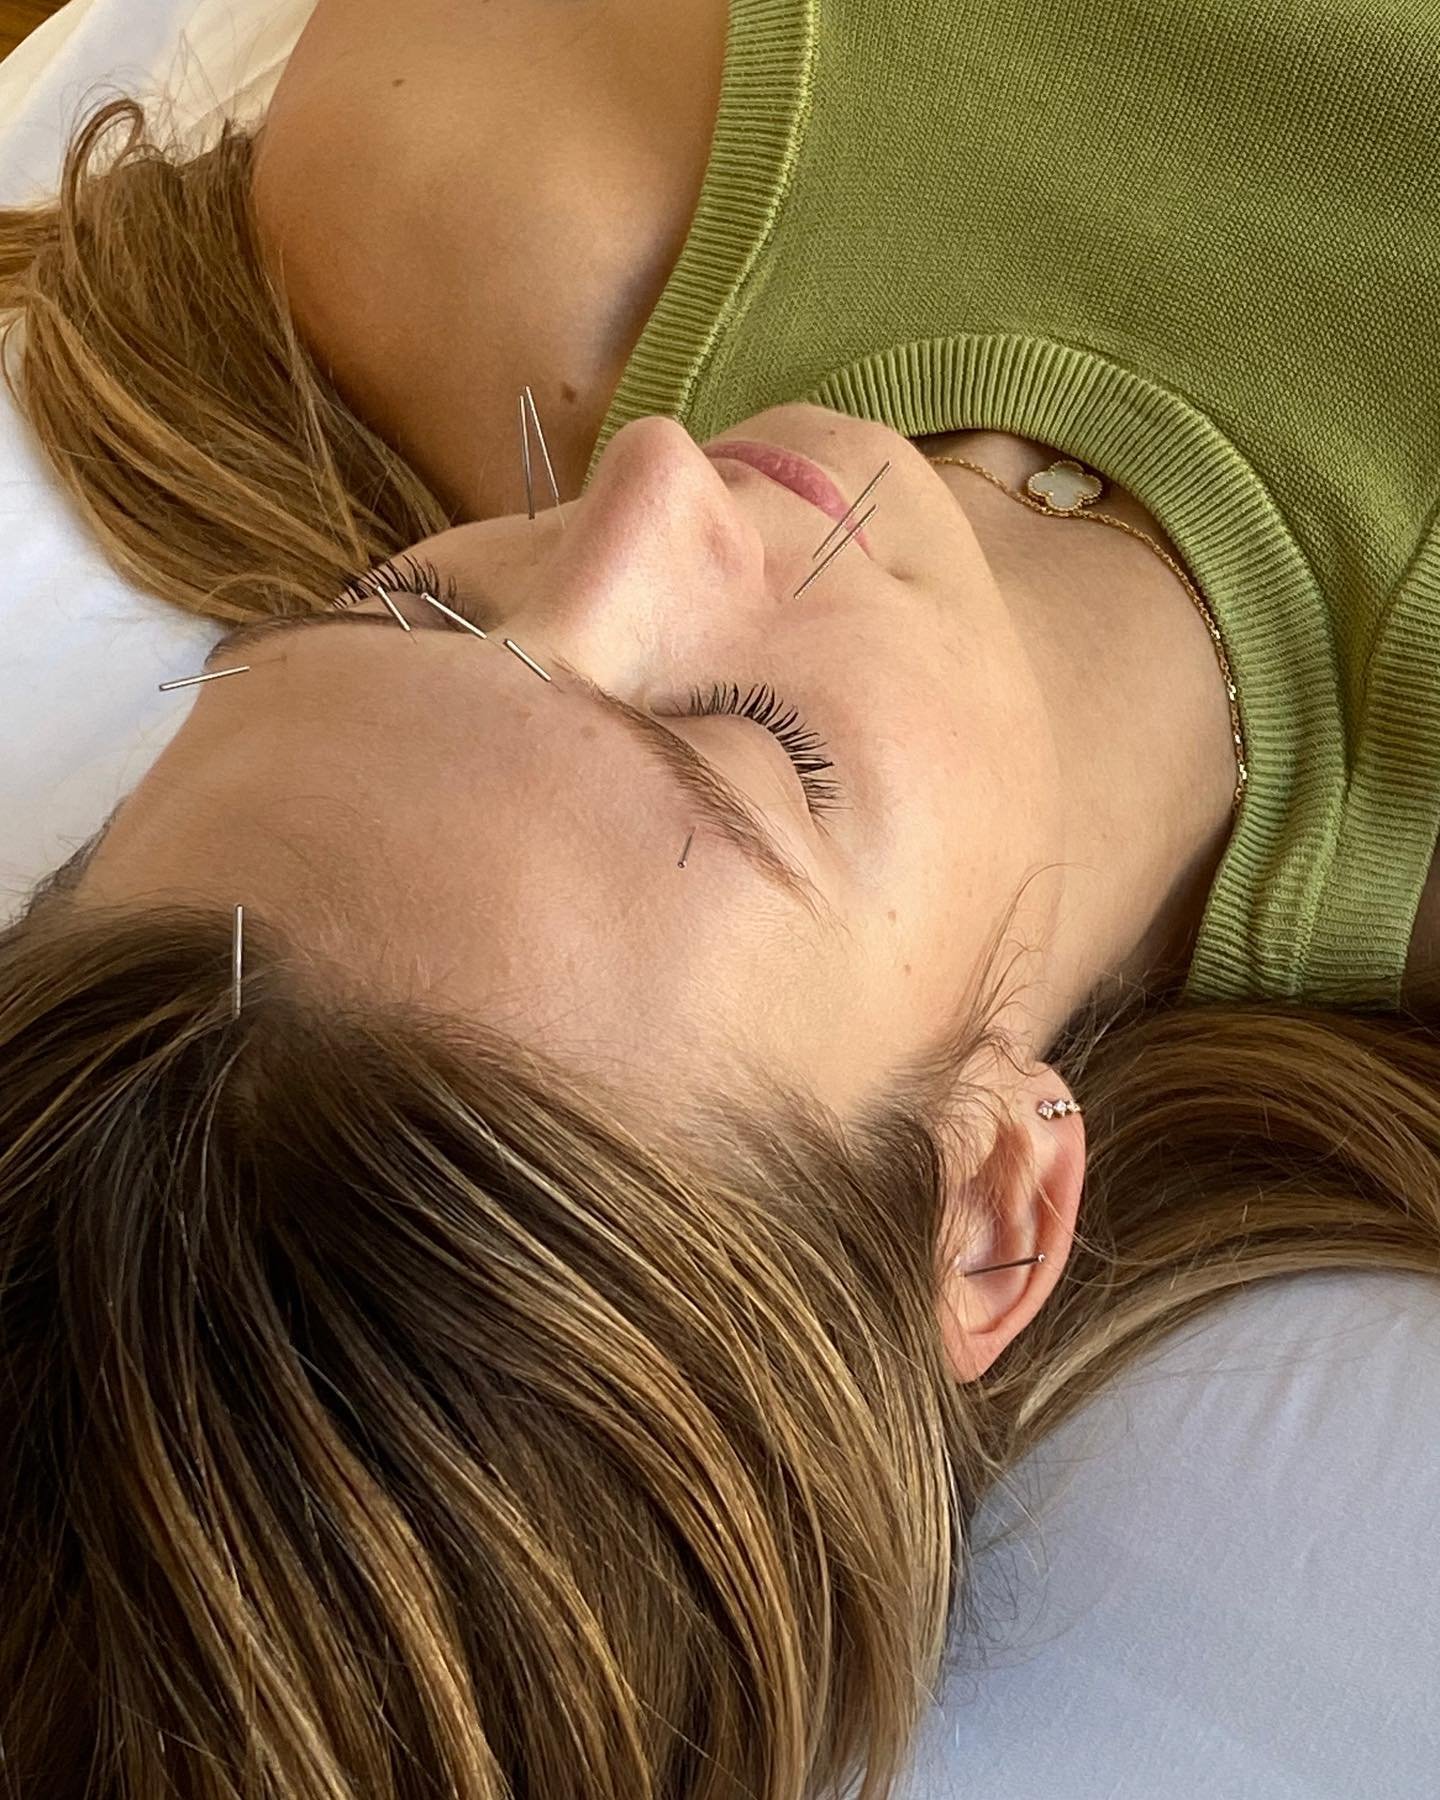 Is facial acupuncture nature&rsquo;s alternative to botox?

The benefits certainly speak for themselves! ✨

This treatment is specifically designed to improve facial appearance by reducing fine lines and wrinkles, improving facial muscle tone, and re